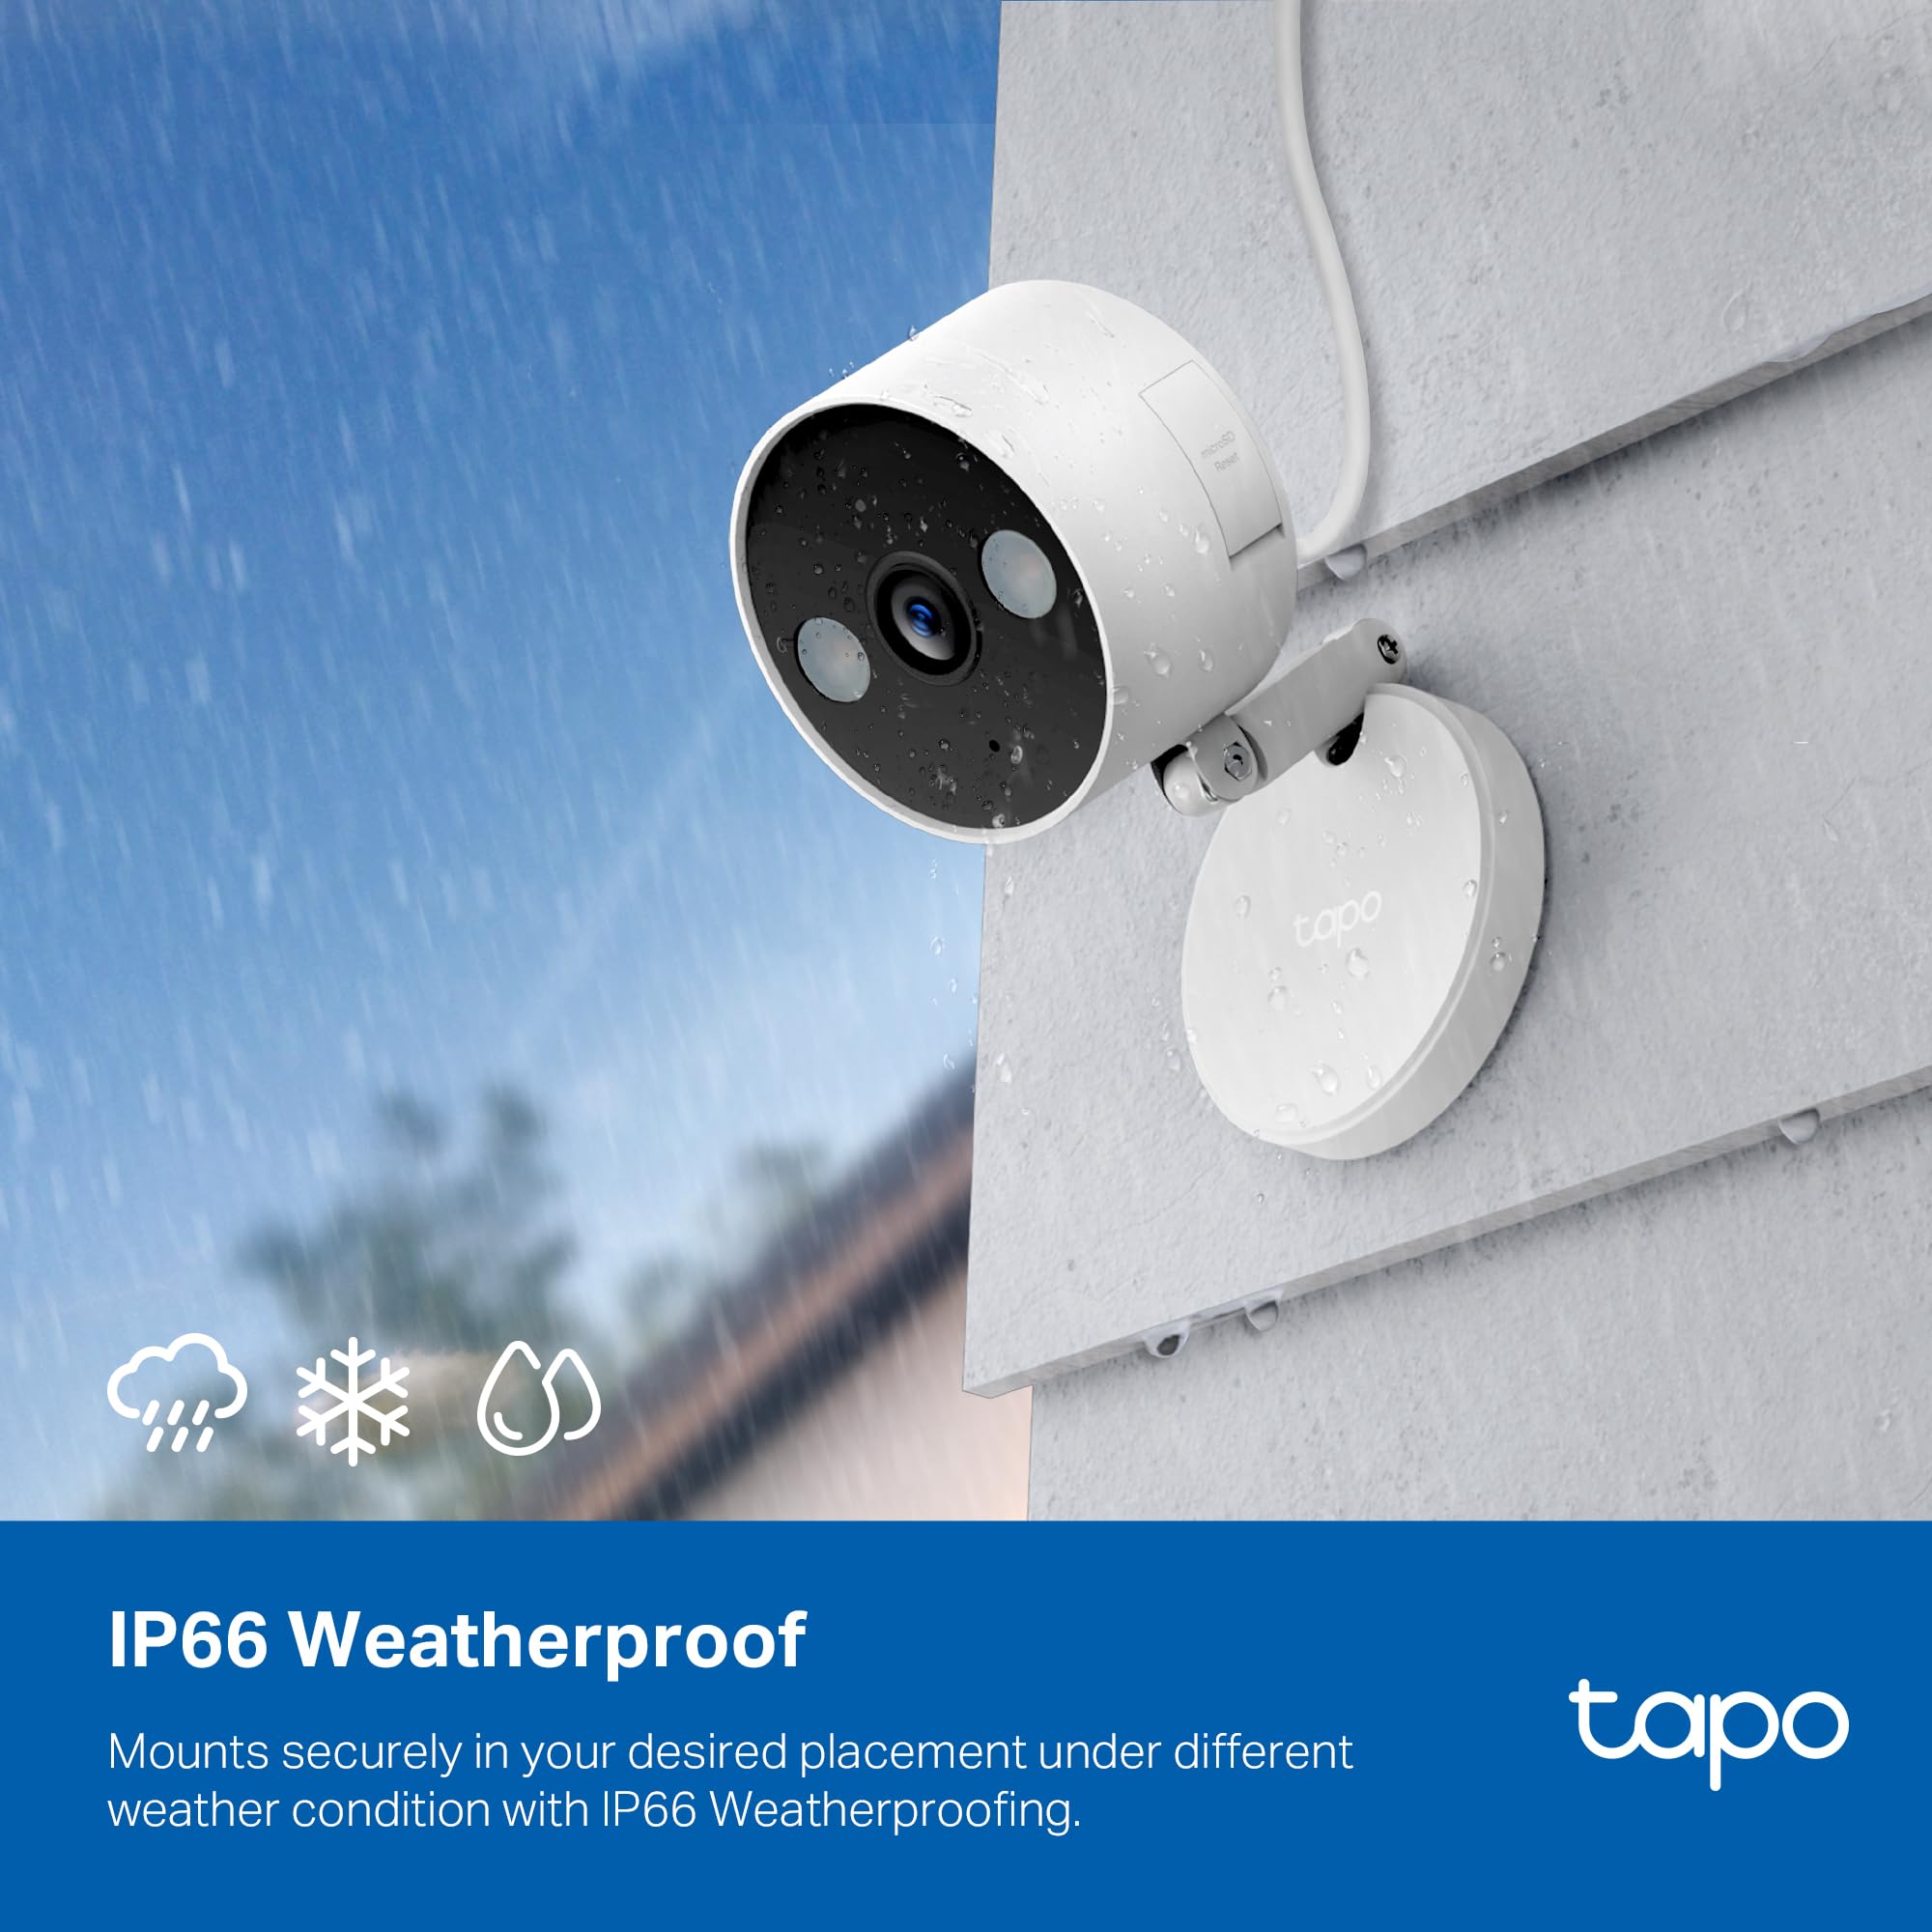 Tapo 2K QHD Security Camera, Indoor/Outdoor, Color Night Vision, Free Person/Pet/Vehicle Detection, Invisible IR Mode for Pet & Baby Monitor, 2-Way Audio, Local & Cloud Storage, 2.4G Wi-Fi (Tapo C120)